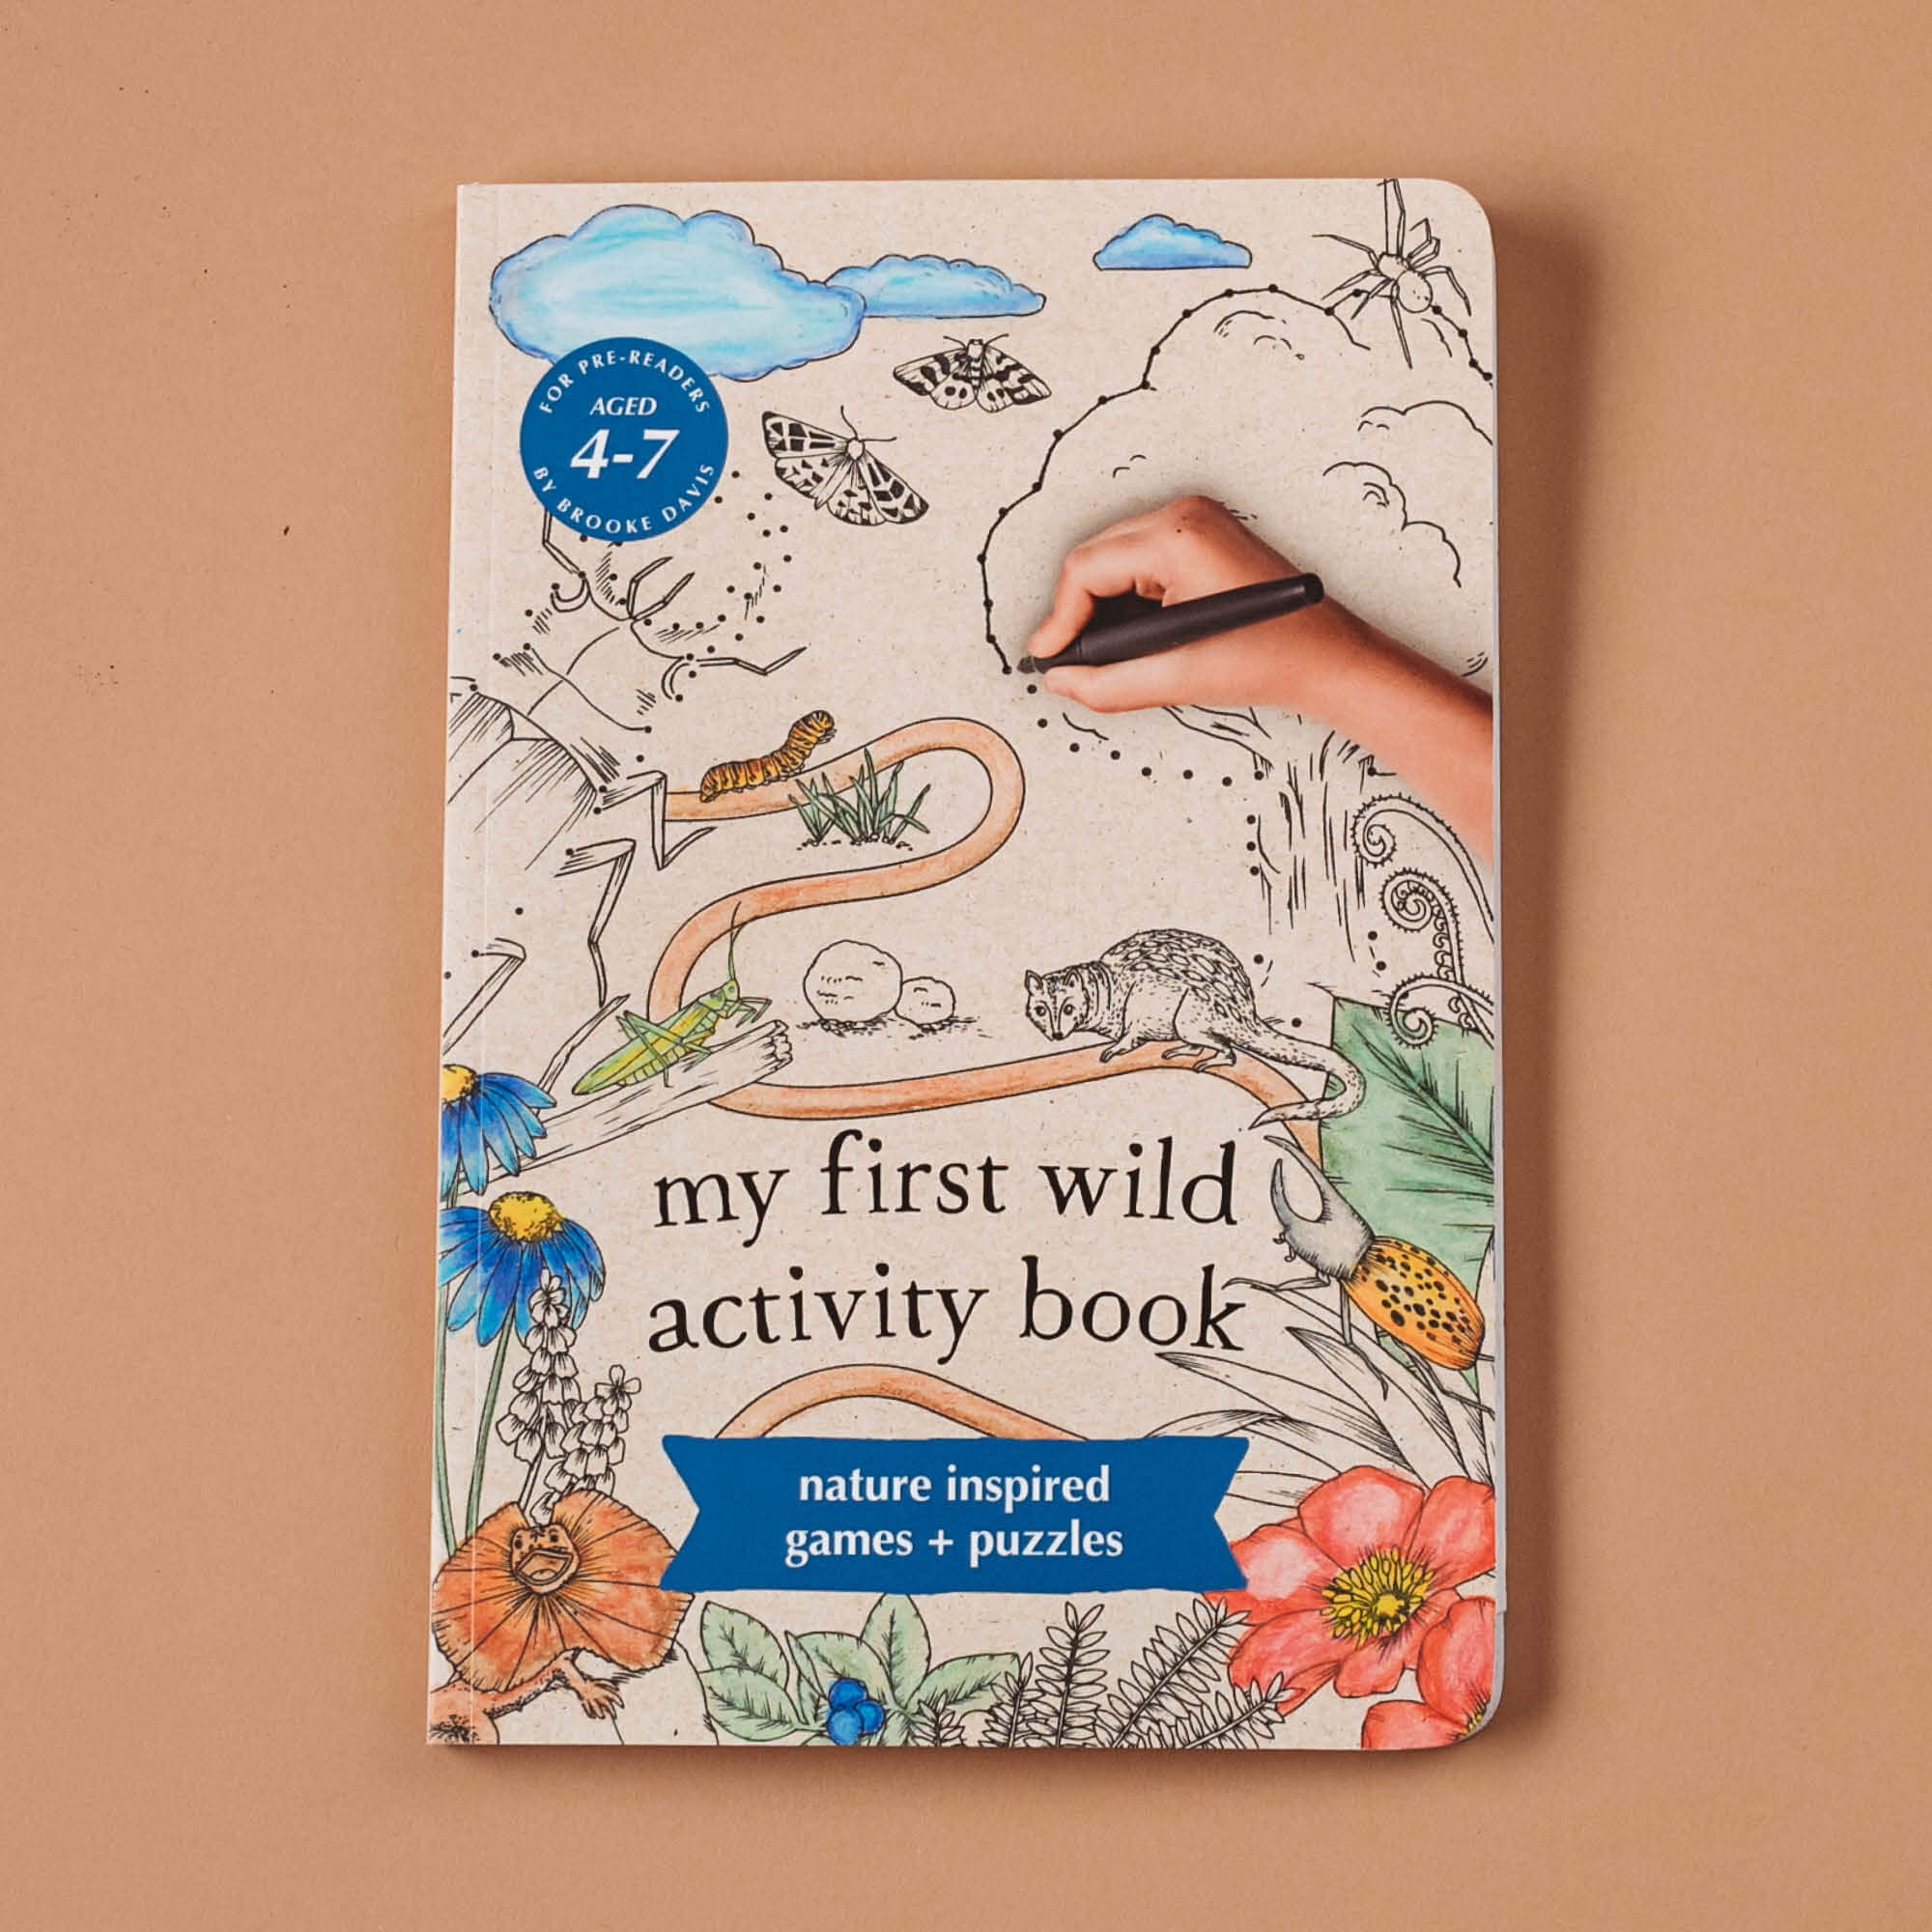 My First Wild Activity Book from Your Wild Books complete set of books for nature craft and play